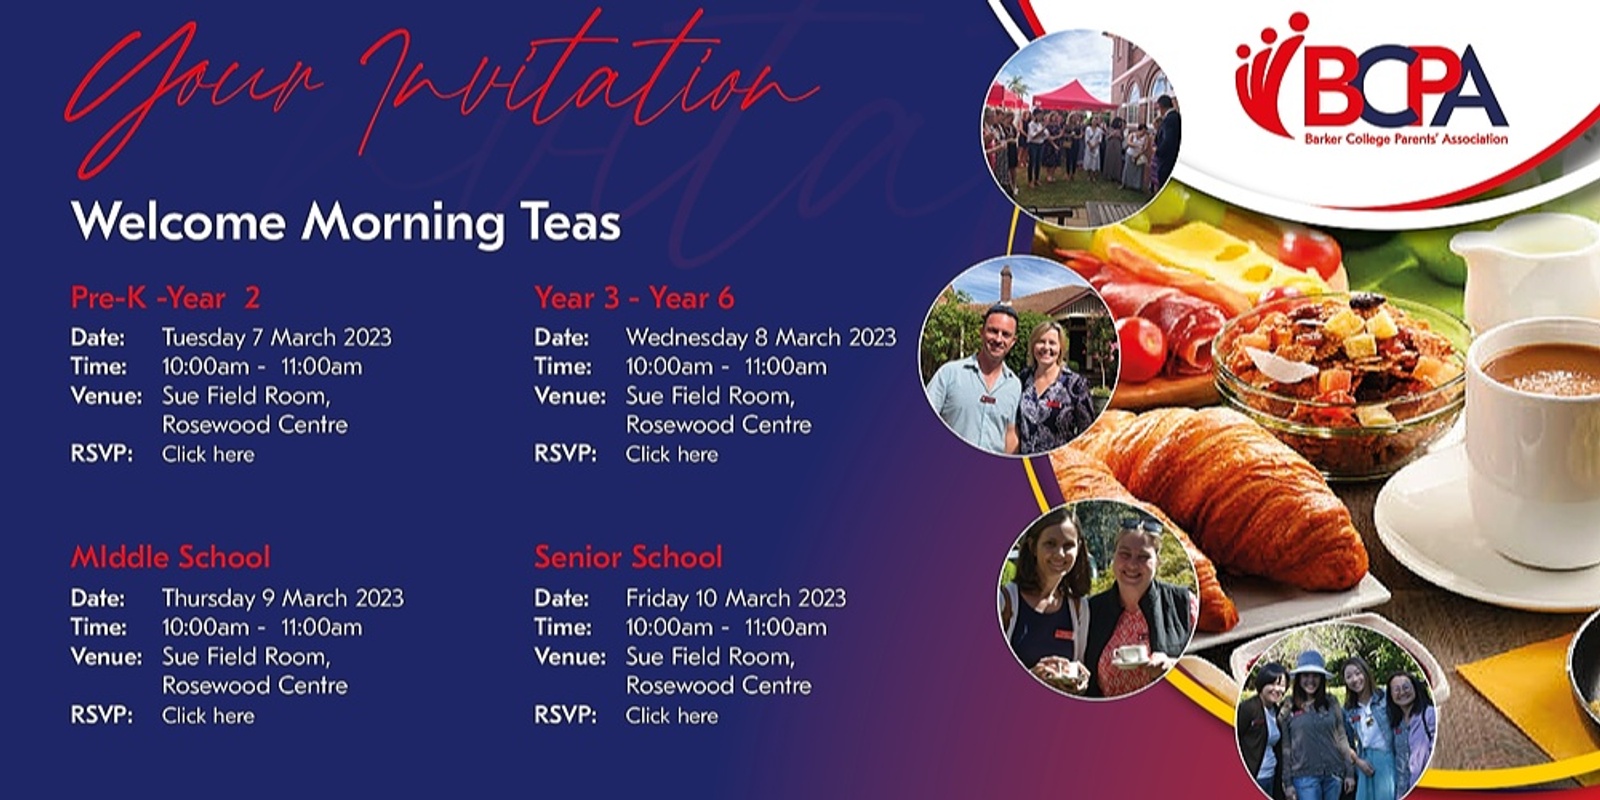 Banner image for Welcome Morning Tea - Parents of Pre K to Year 2 students